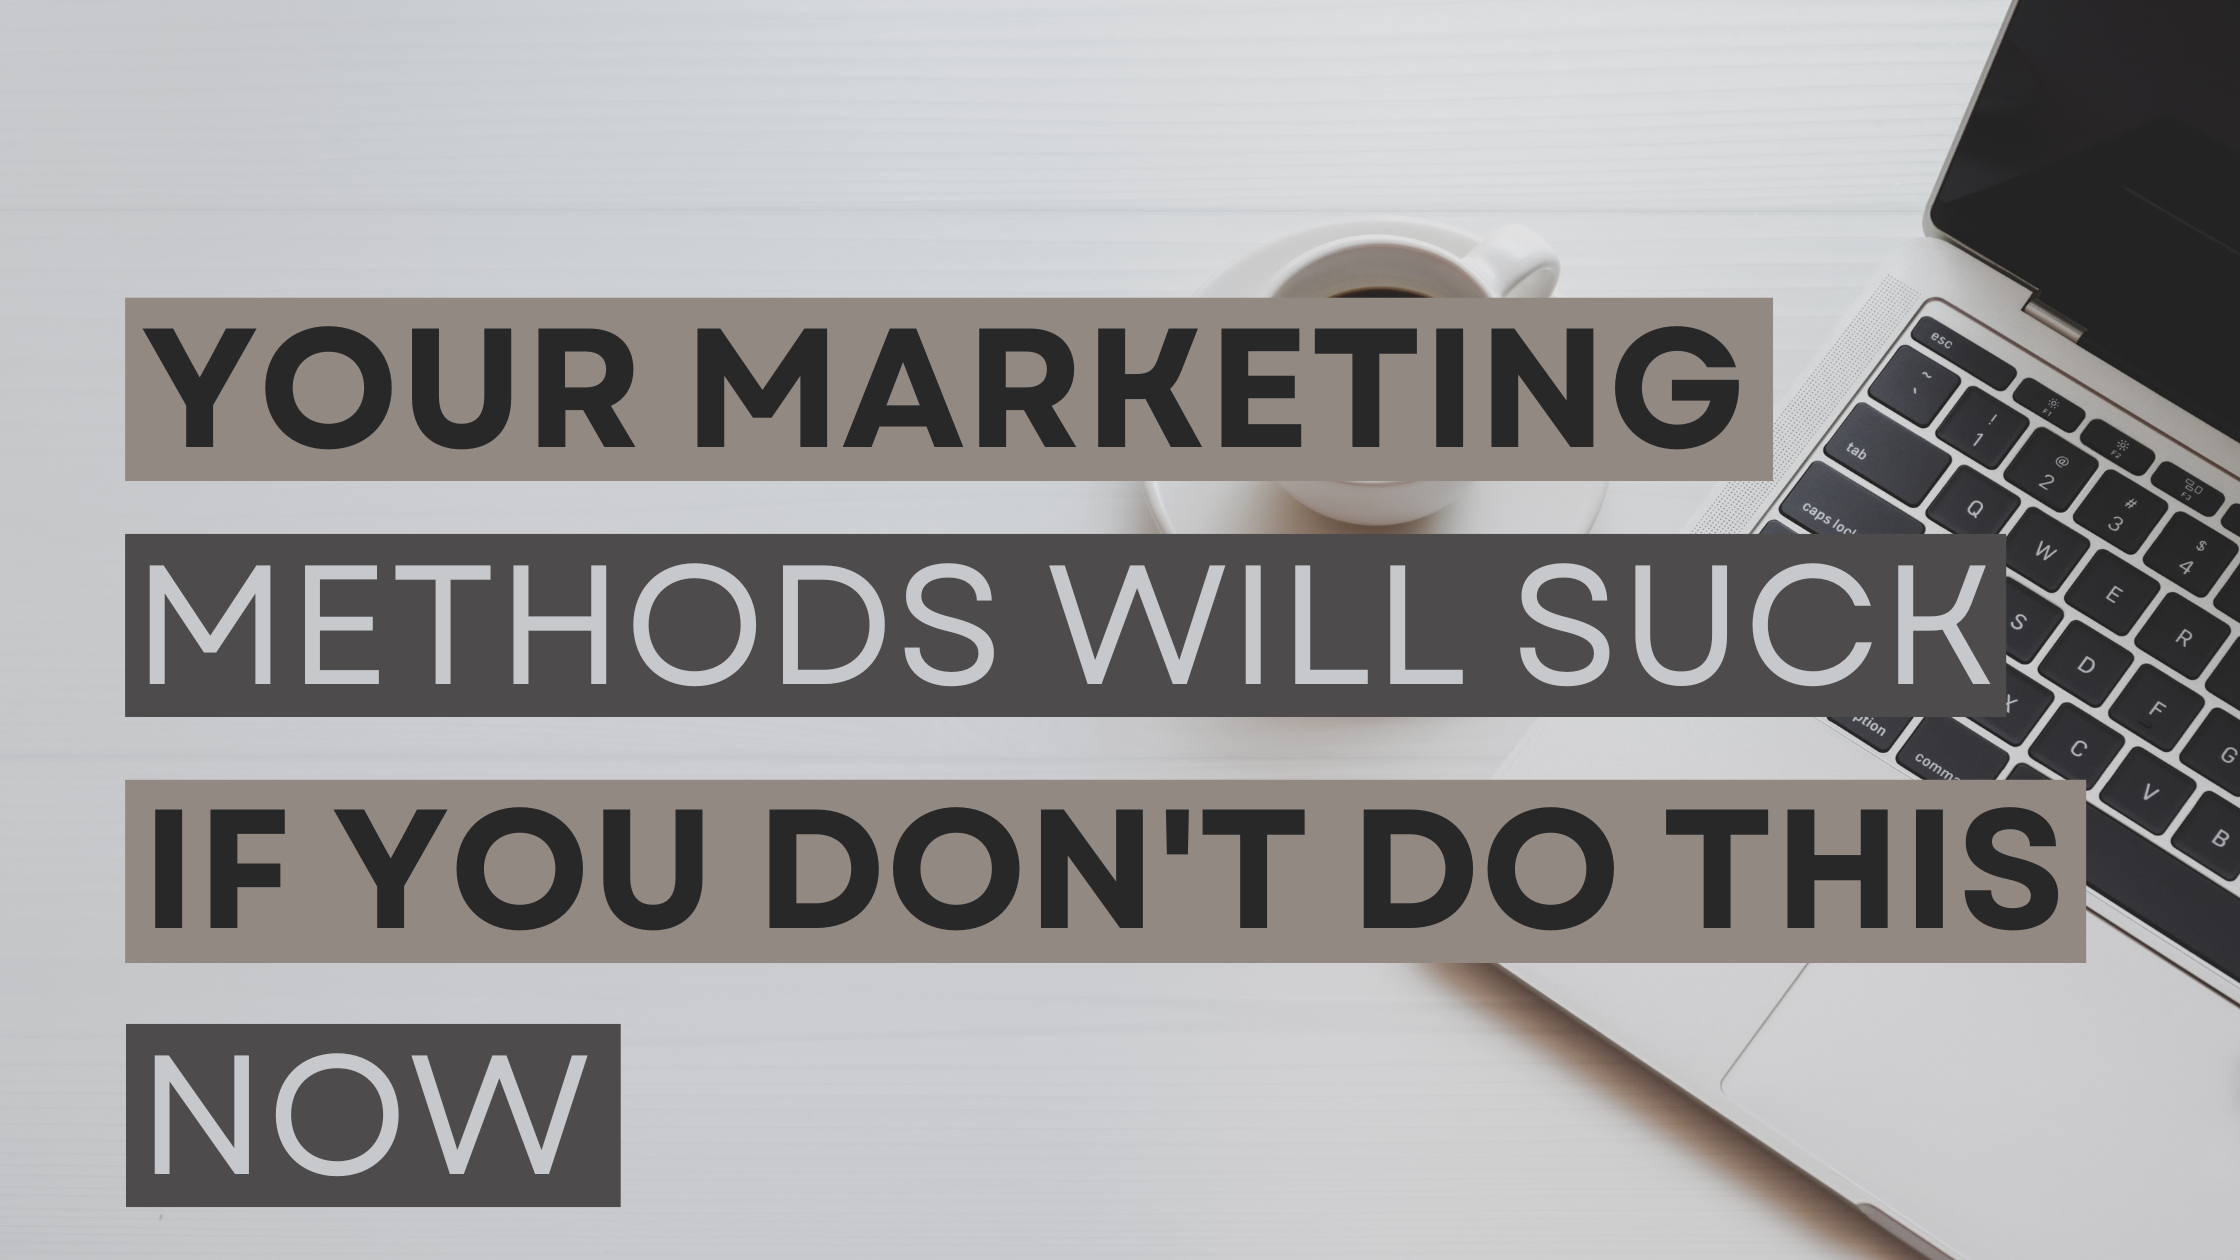 Your marketing methods will suck if you don't do this now